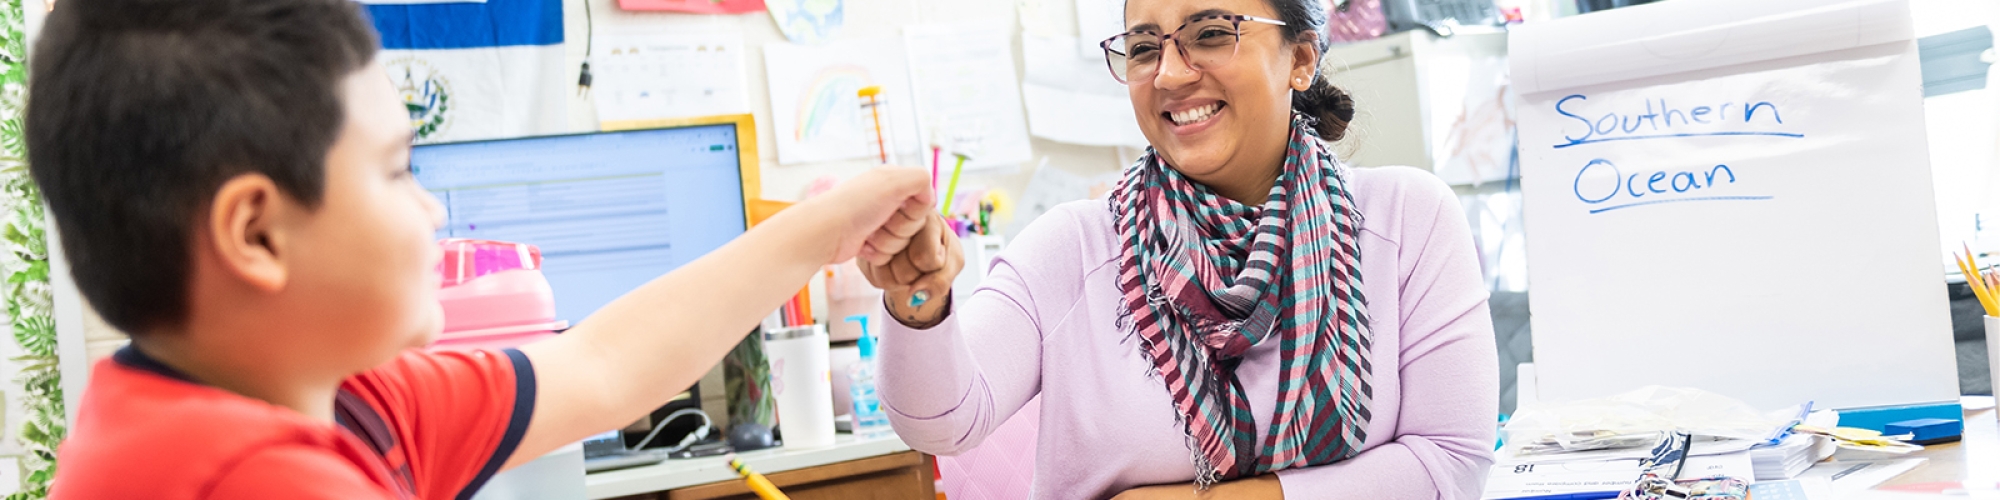 Teacher working with student at teacher desk bumping fists in celebration